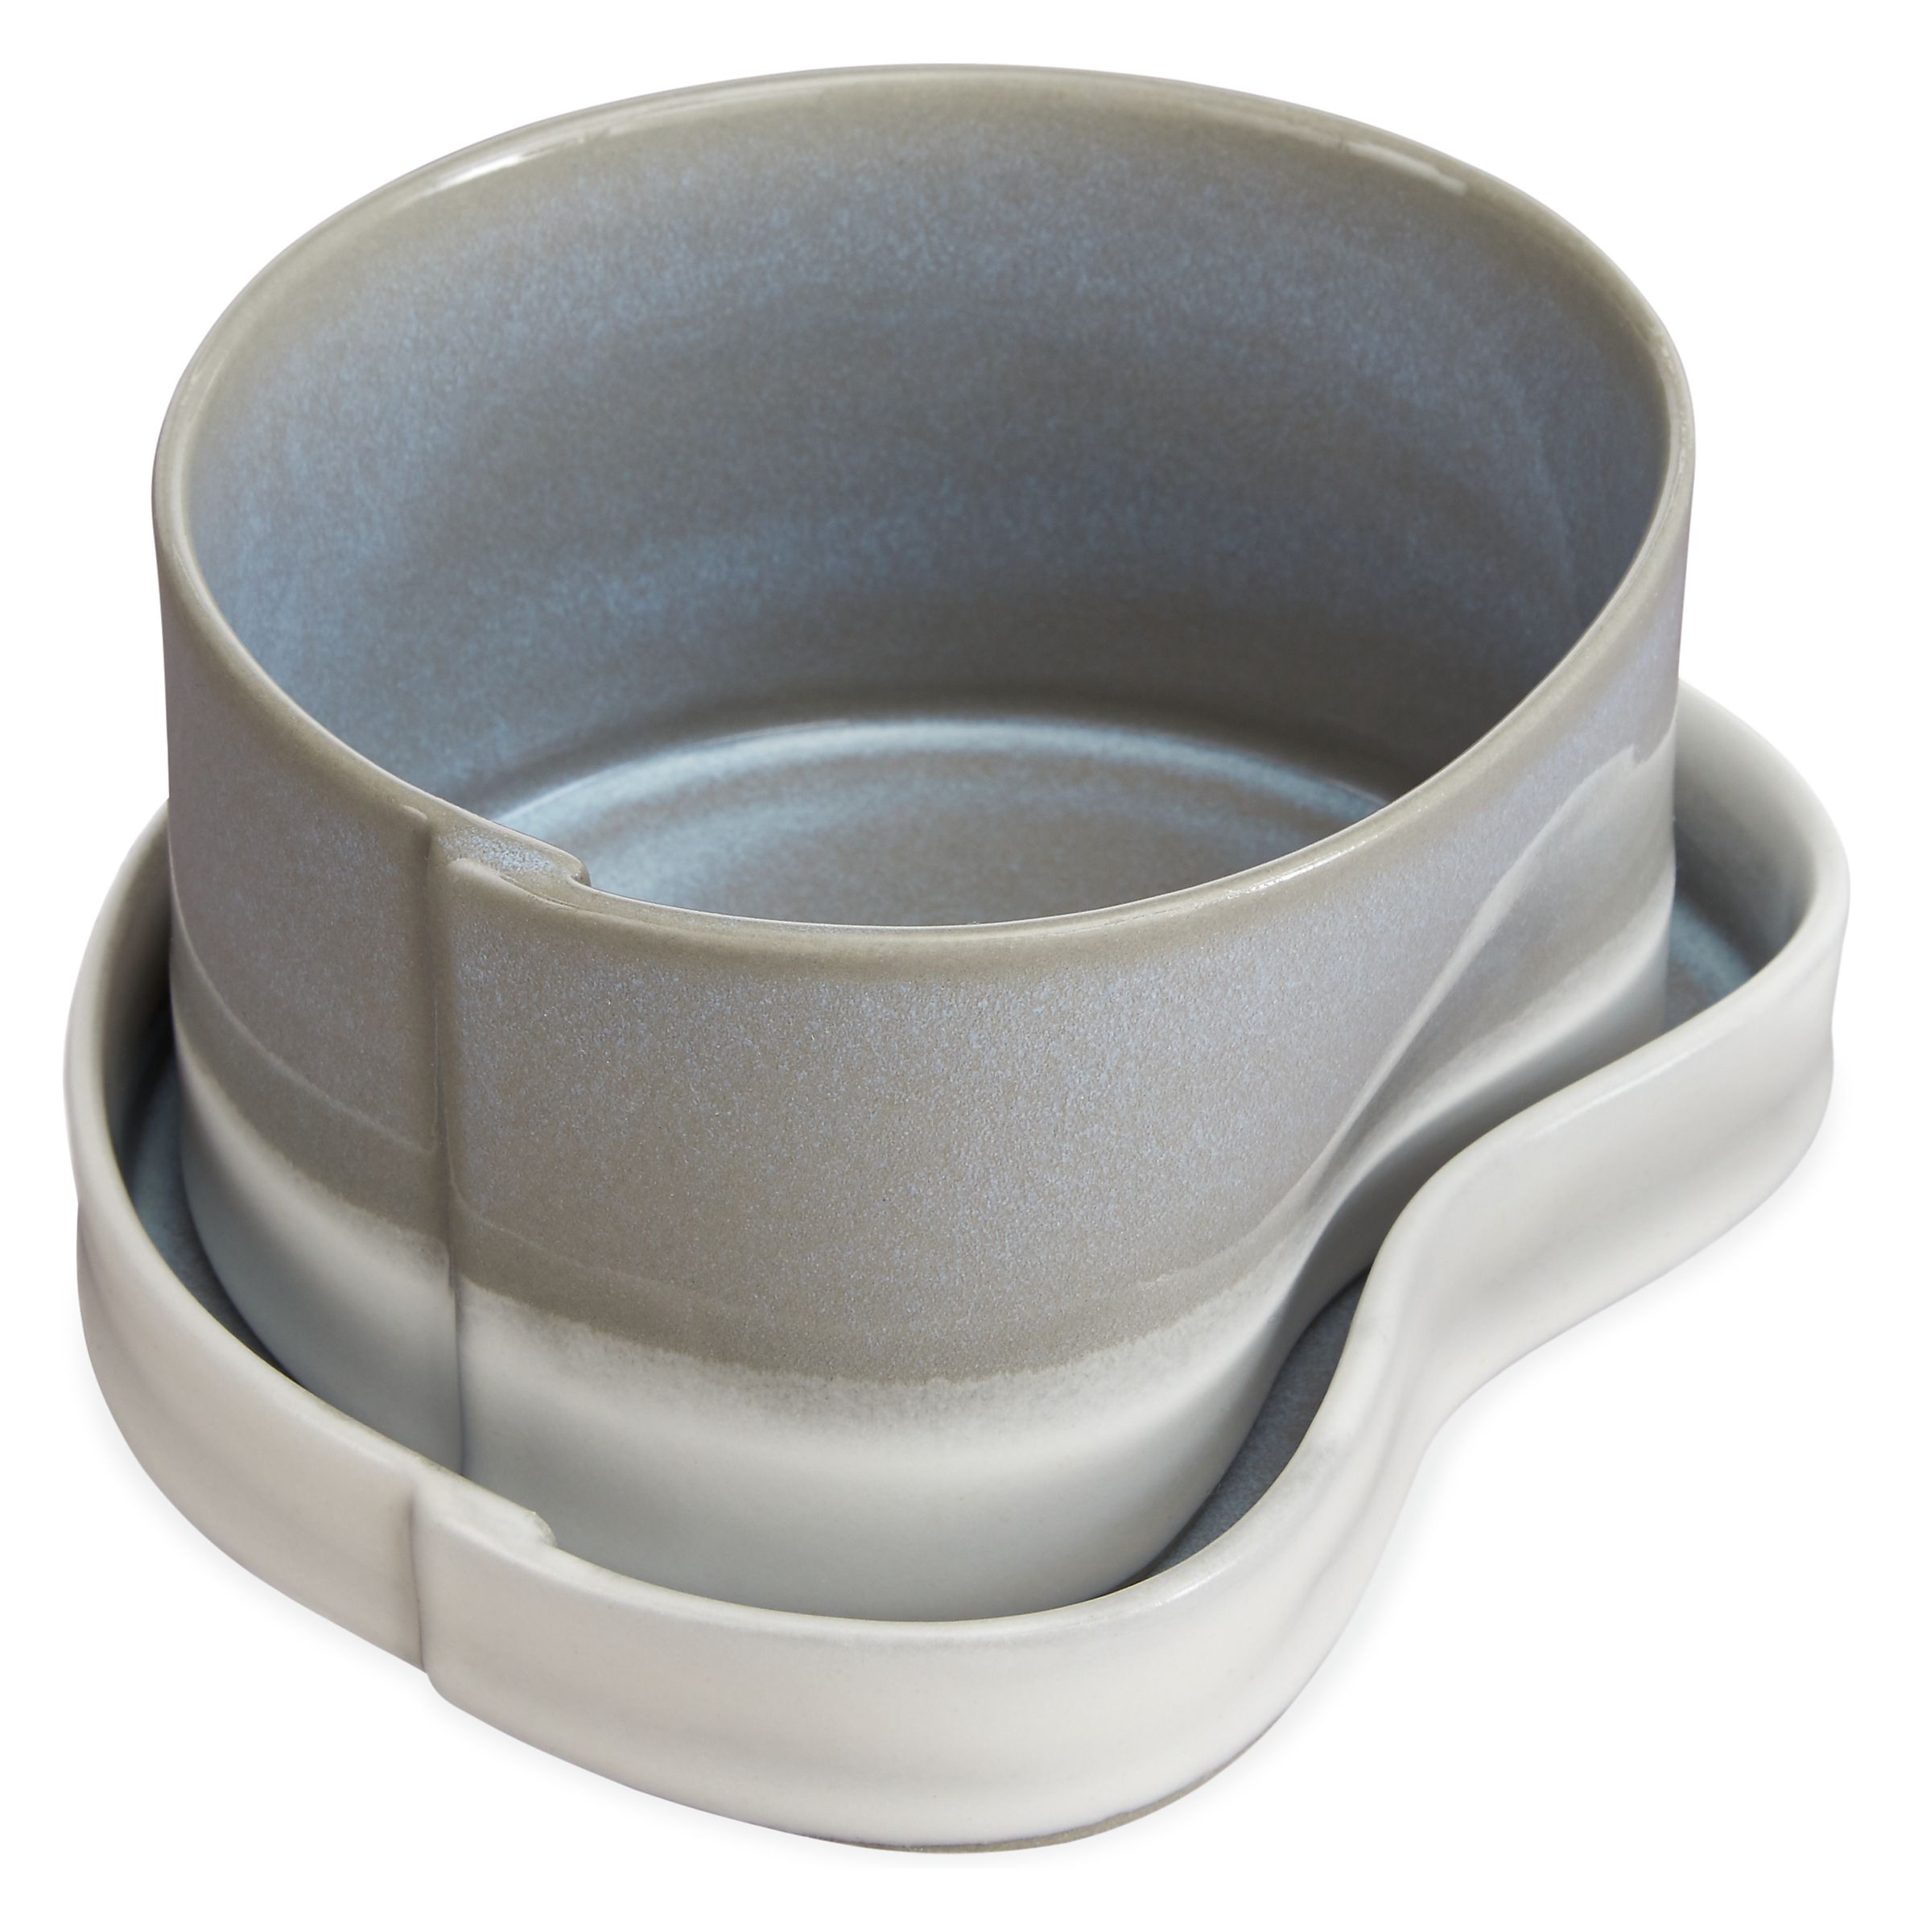 Cumberland Planter with Tray in Grey/White